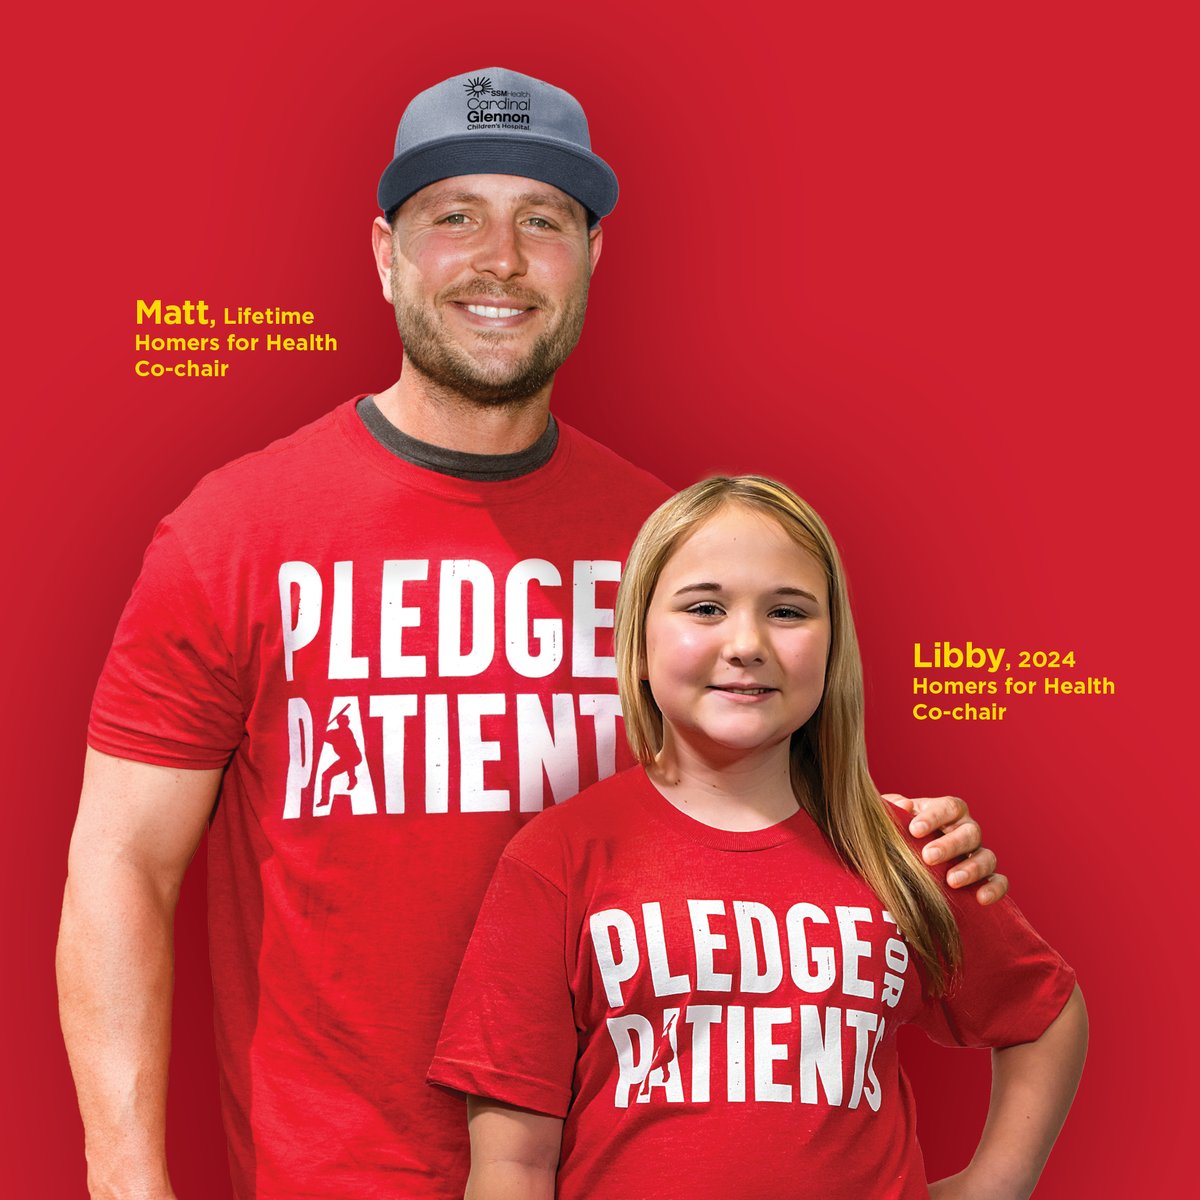 Homers for Health is back and we would like to introduce our newest Co-chair Libby!! Libby’s journey with Cardinal Glennon began in 2022. This year, we pledge for patients just like Libby! Make your pledge today at homersforhealth.org!